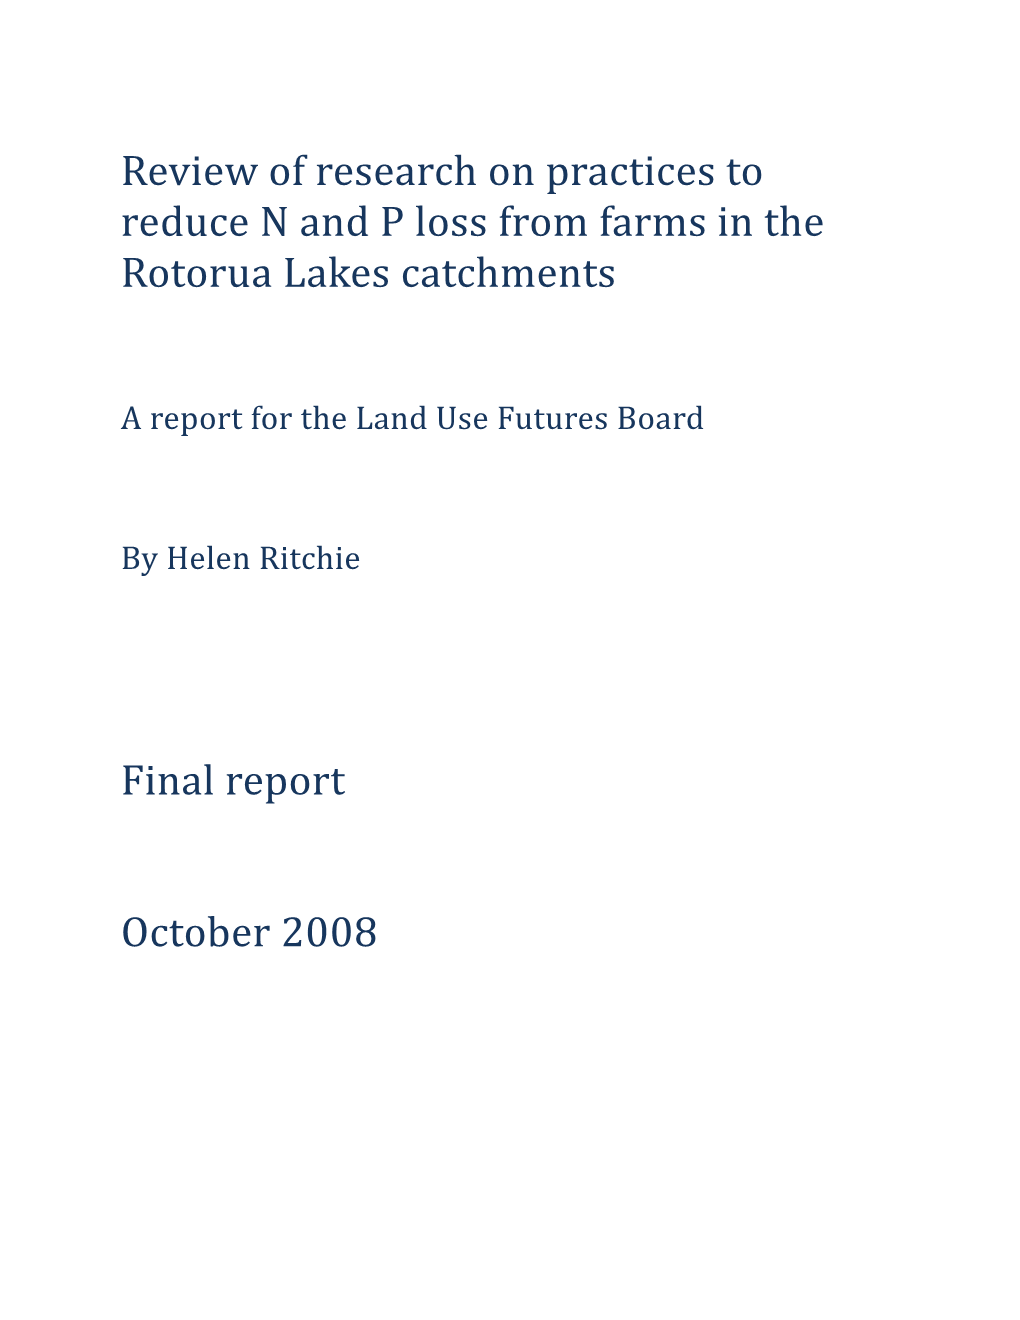 Review of Research on Practices to Reduce N and P Loss from Farms in the Rotorua Lakes